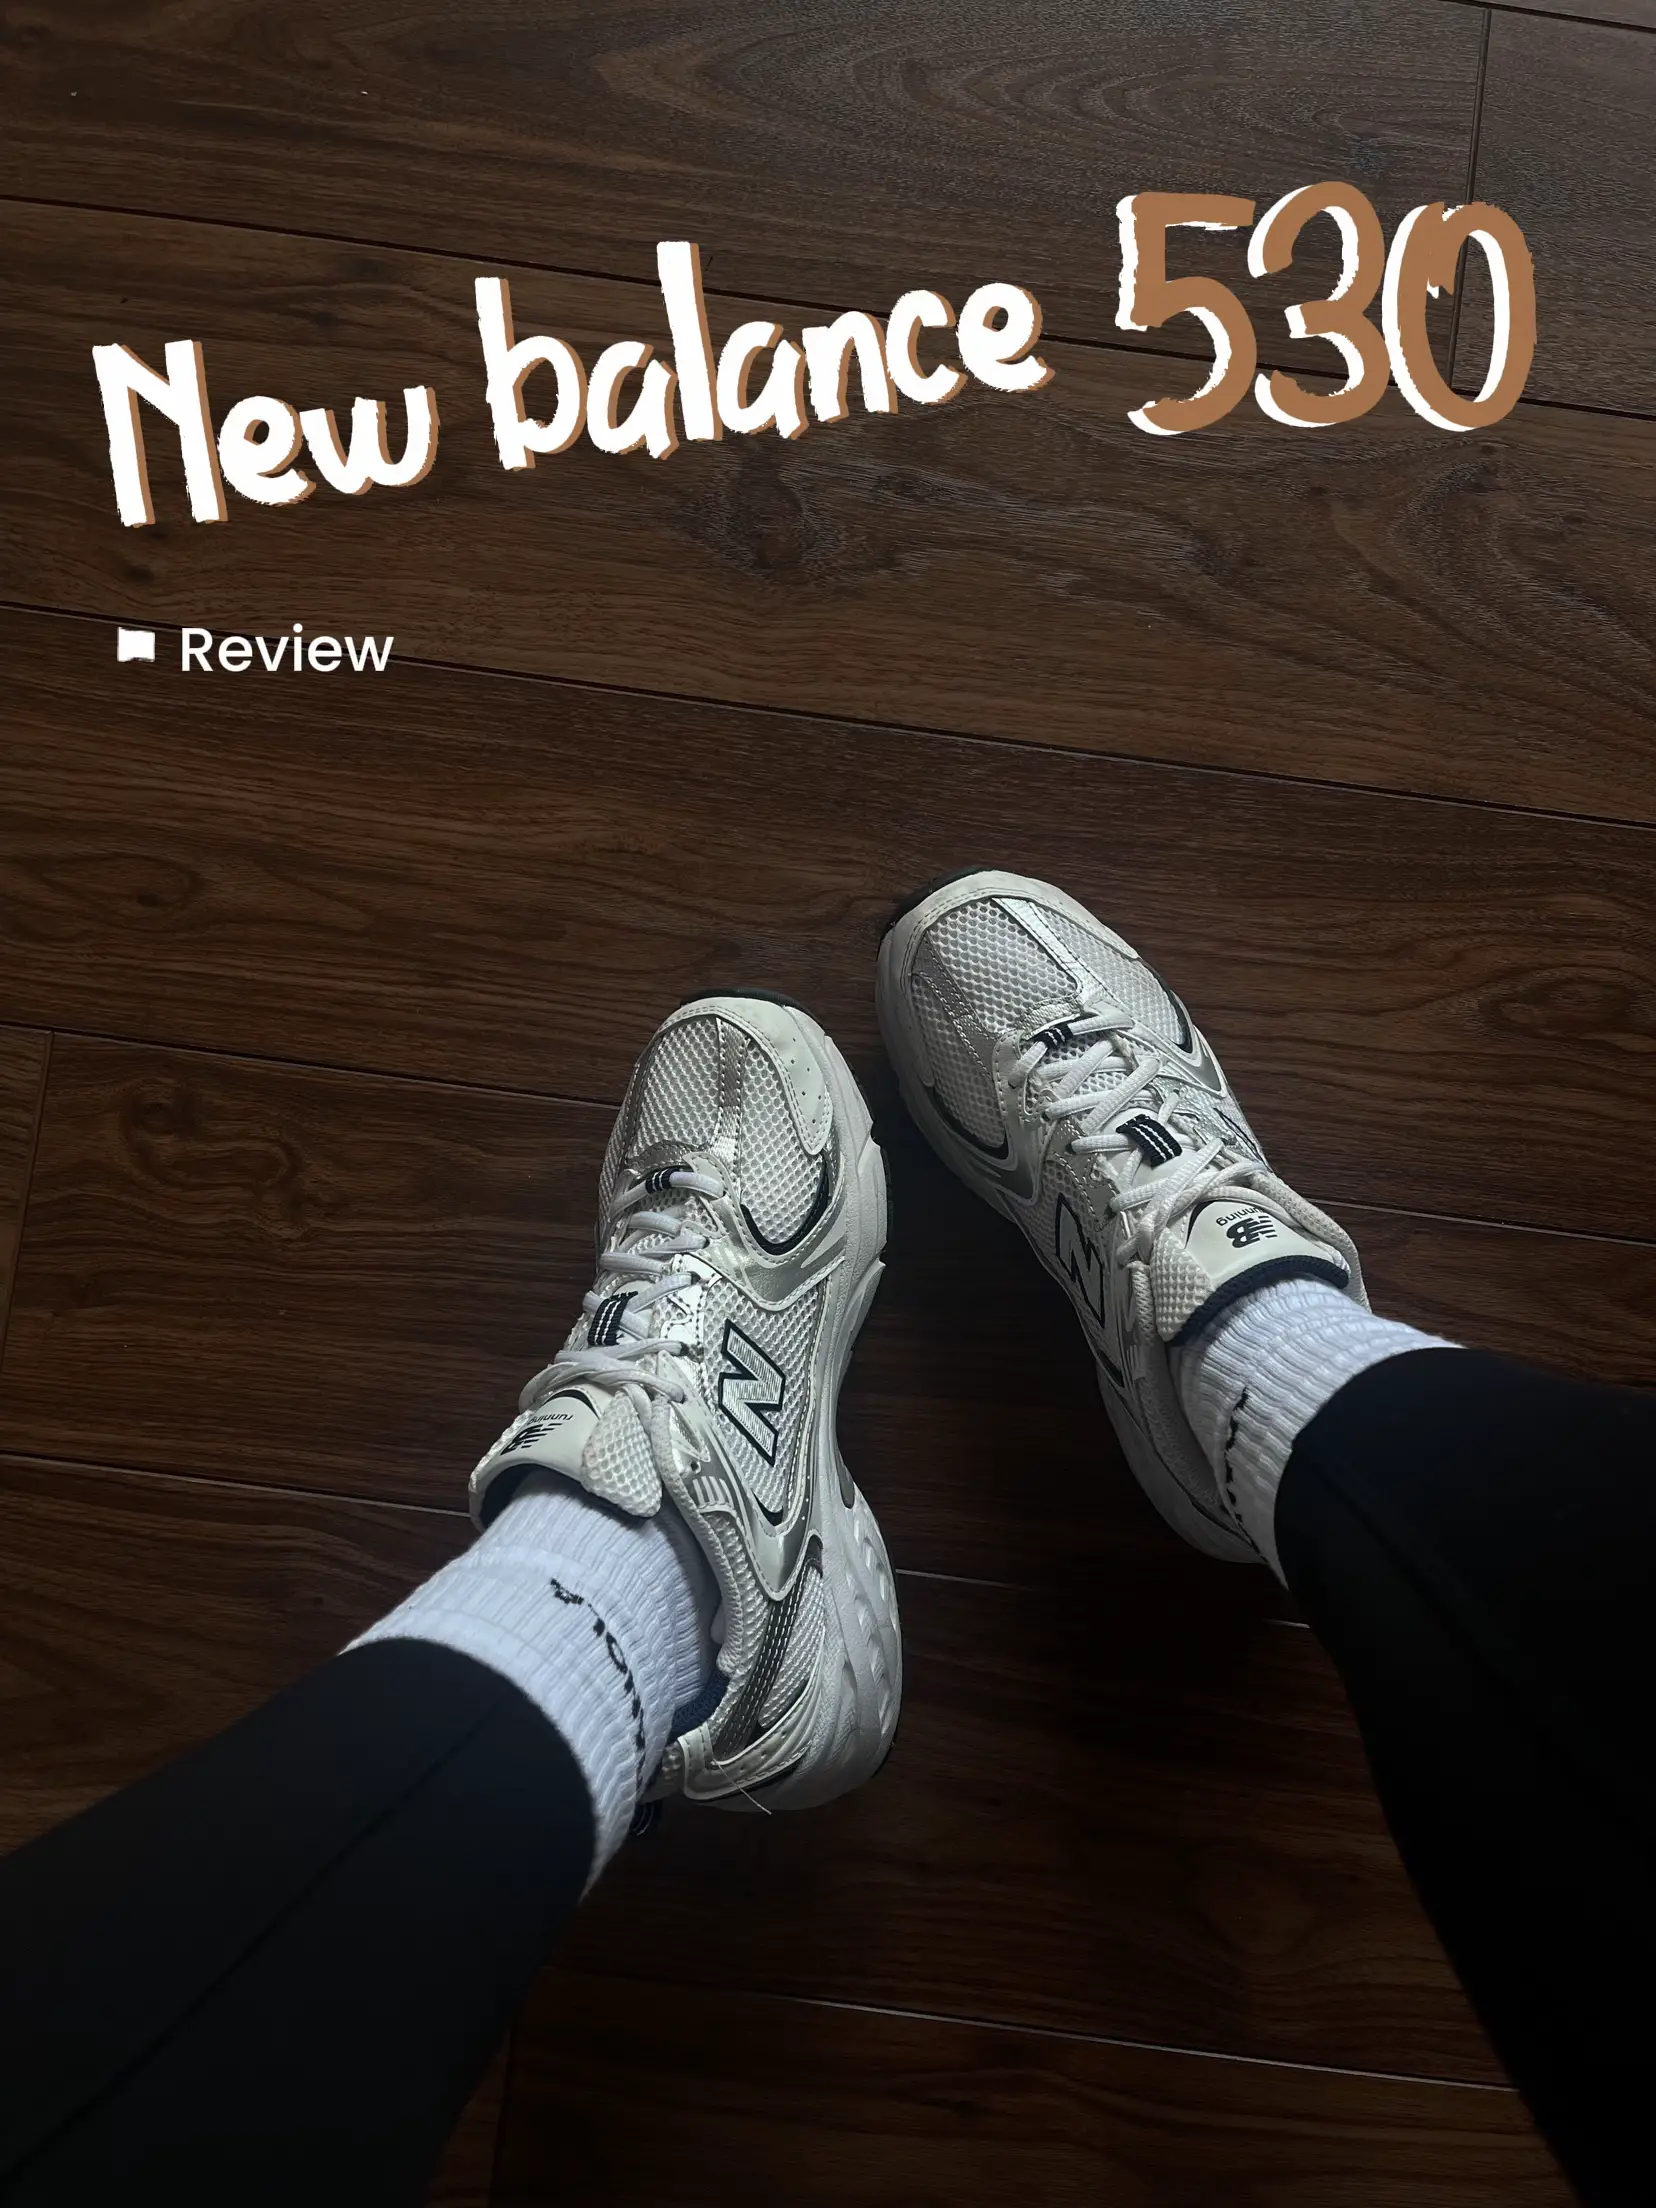 New Balance 530, product review, Gallery posted by Kavveeta